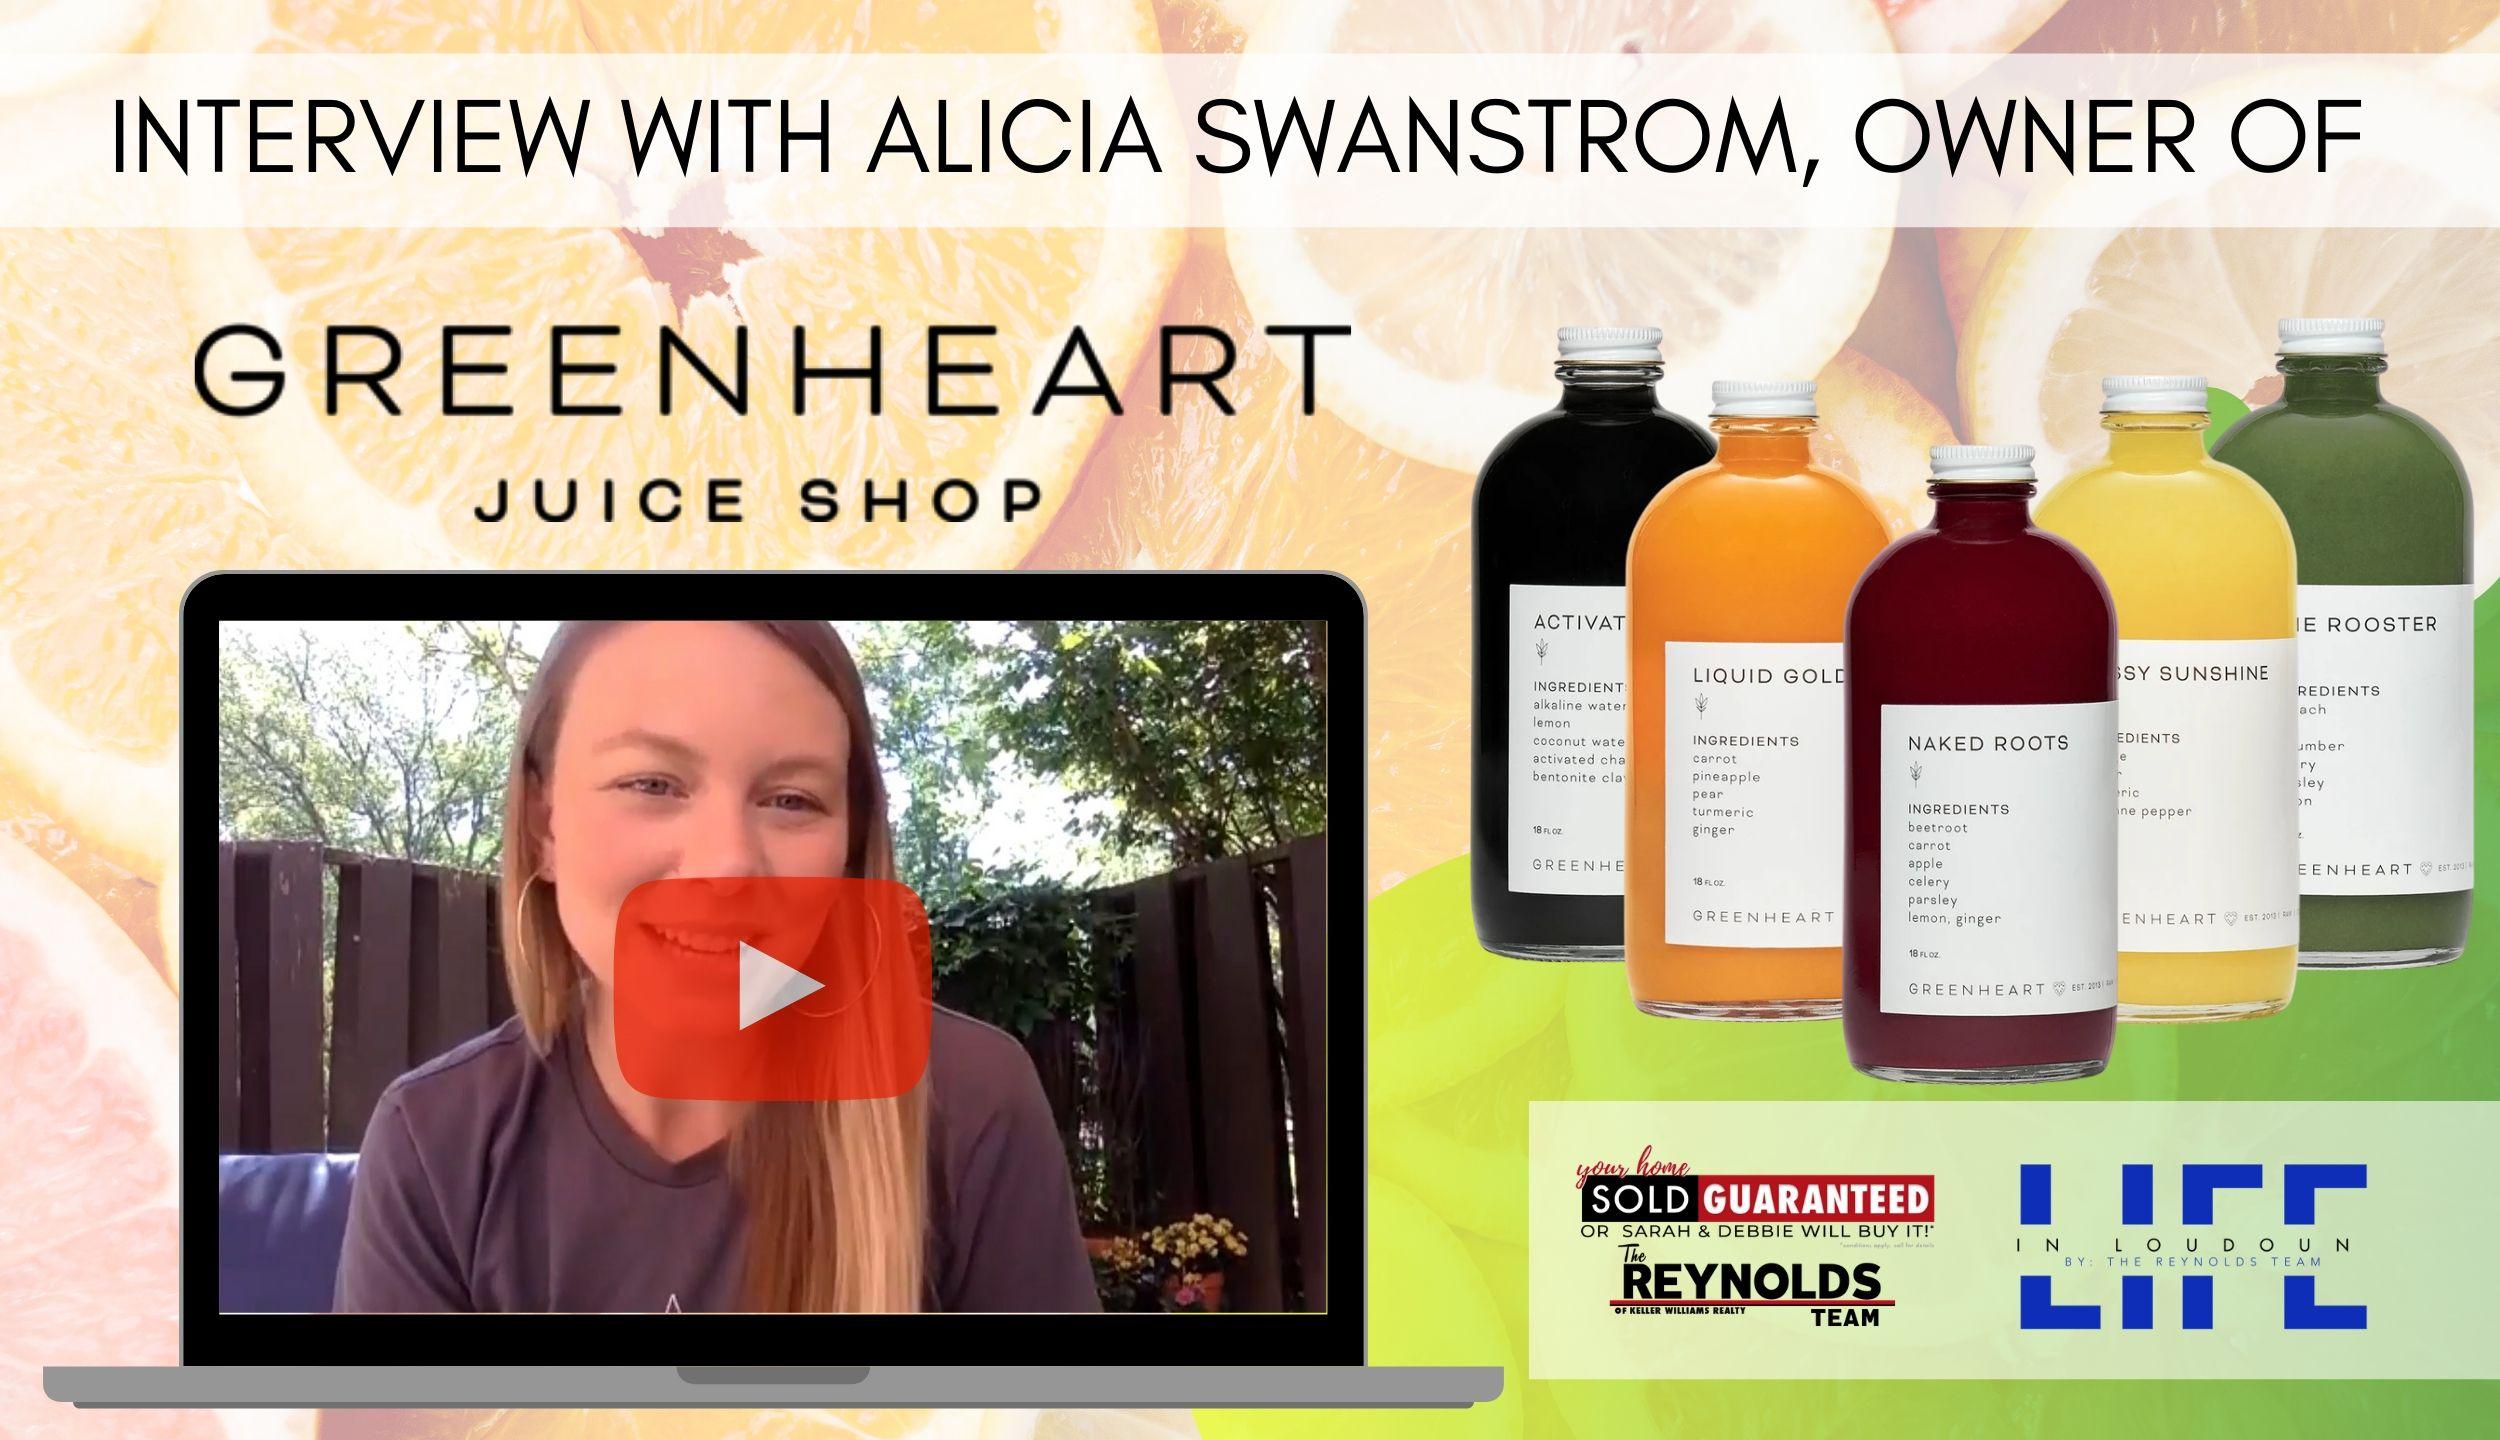 Life In Loudoun: Interview With Alicia Swanstrom, Owner of Greenheart Juice Shop